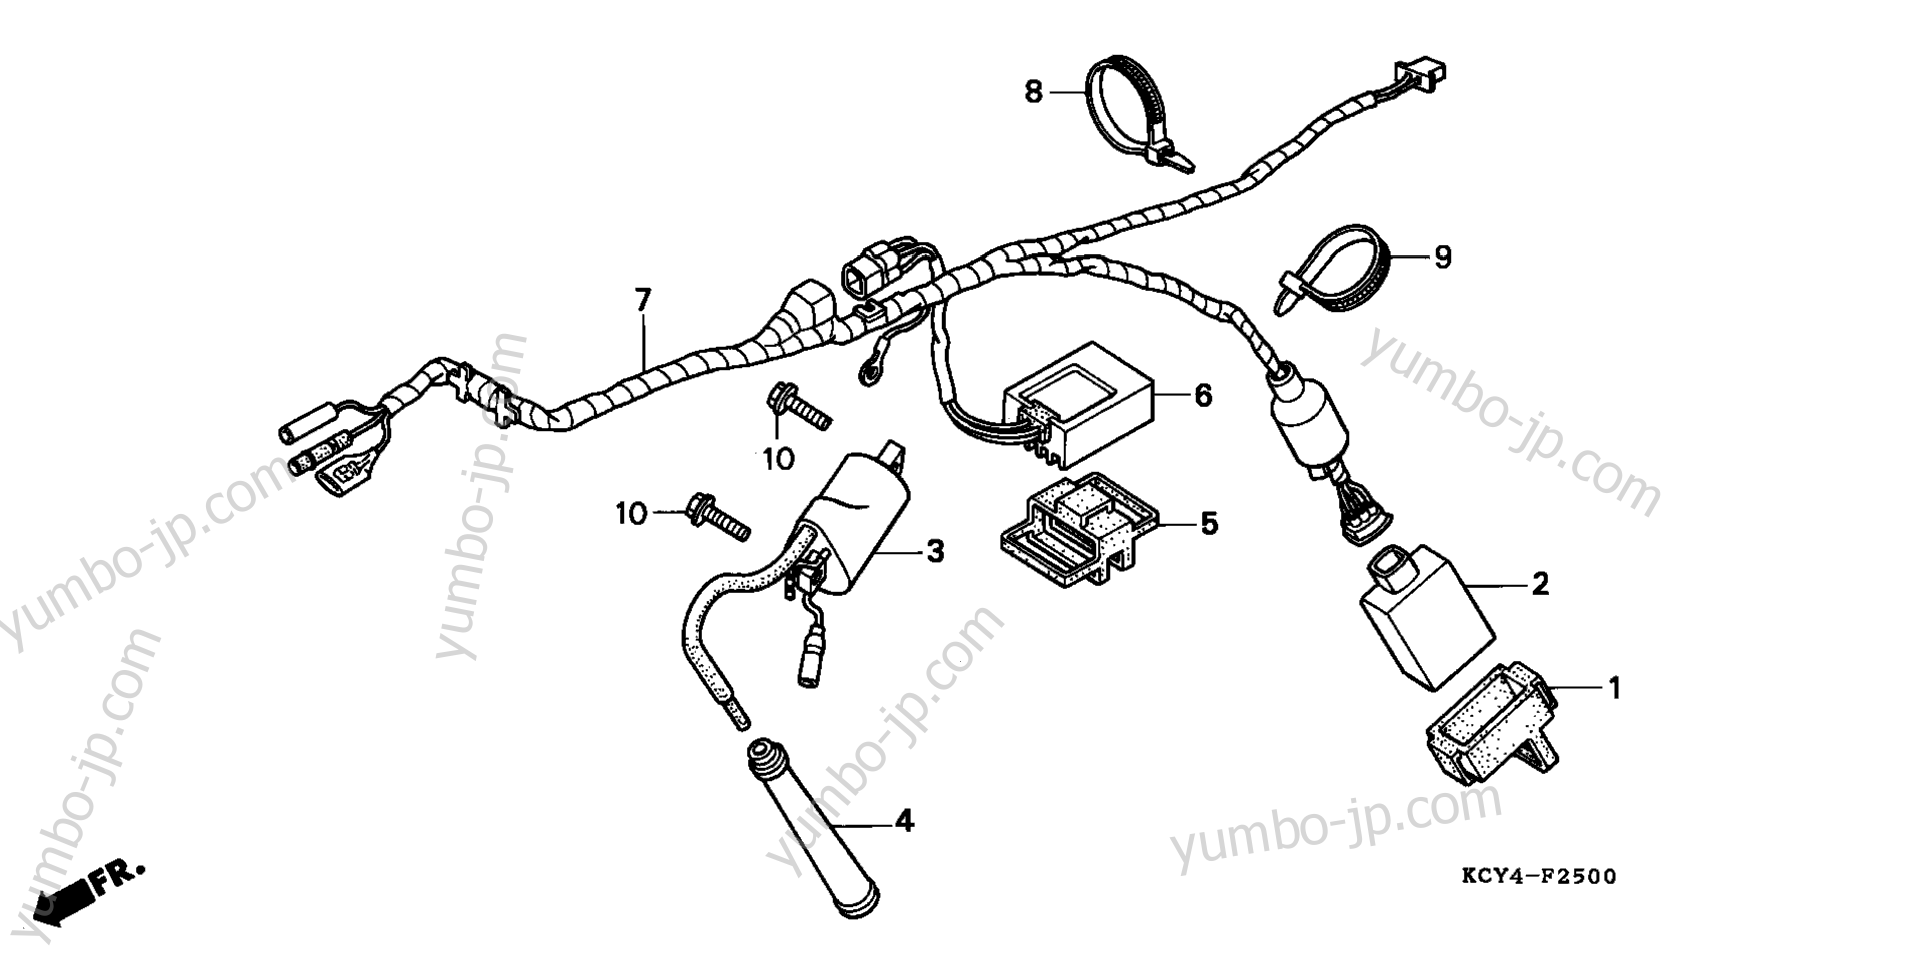 WIRE HARNESS for motorcycles HONDA XR400R A 1997 year